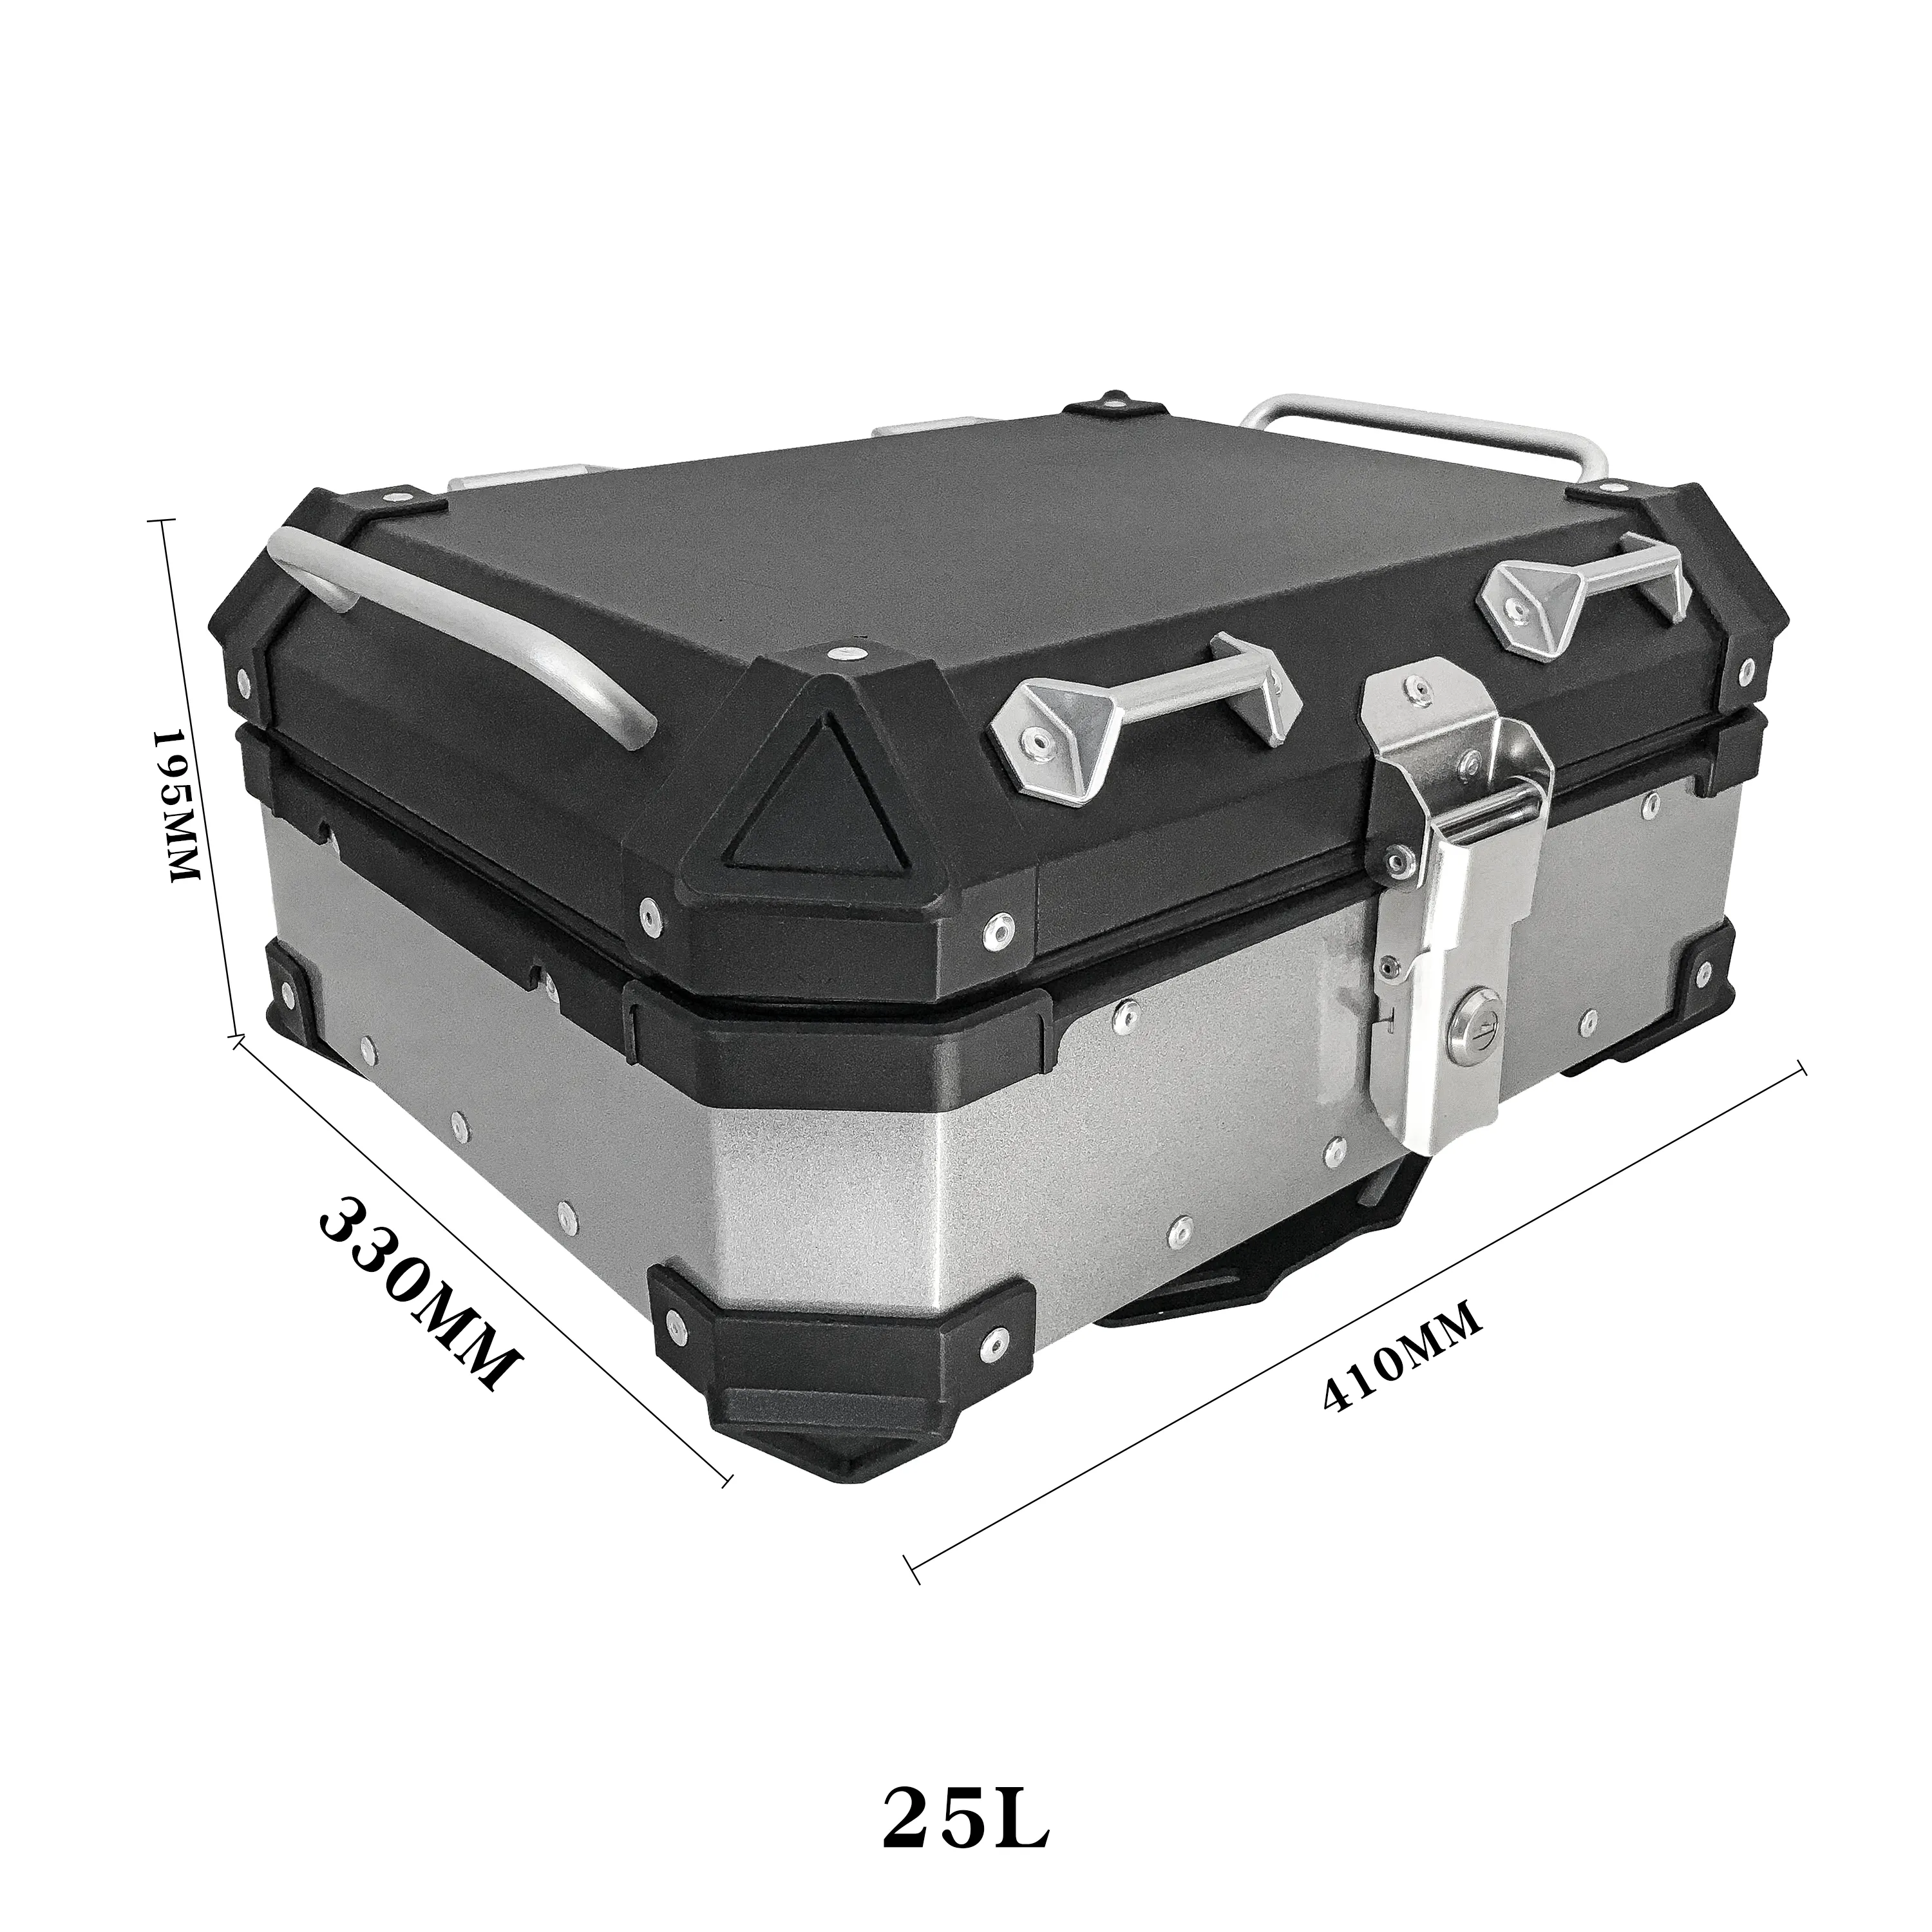 22L High quality Motorcycle Delivery Trunk Waterproof Top Box Aluminum Alloy Motorcycle